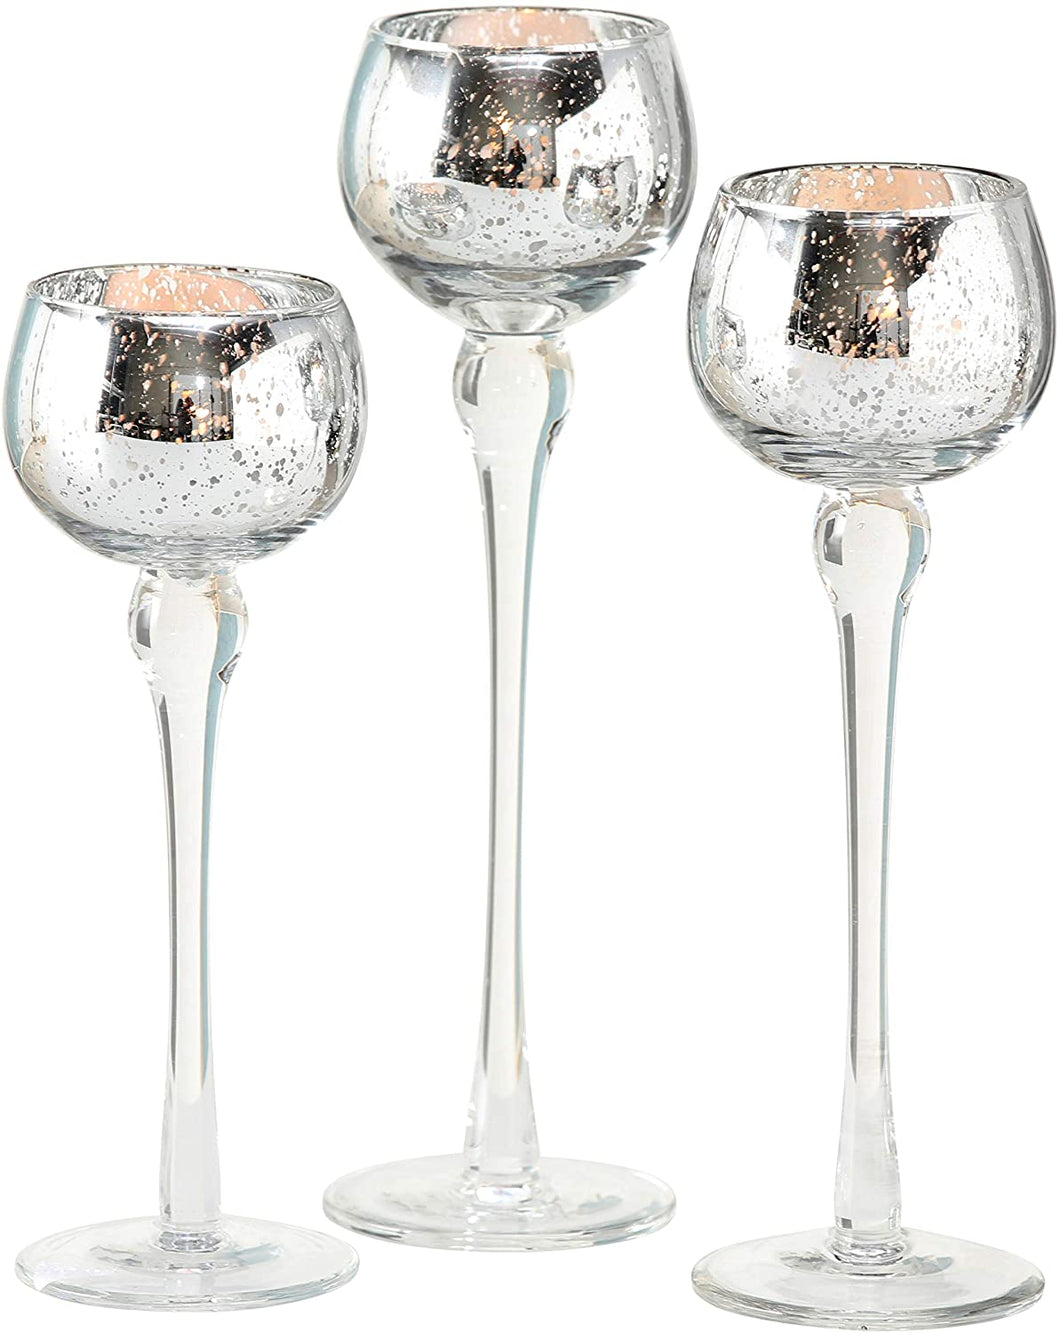 Glam Candle Holders, Set of 3